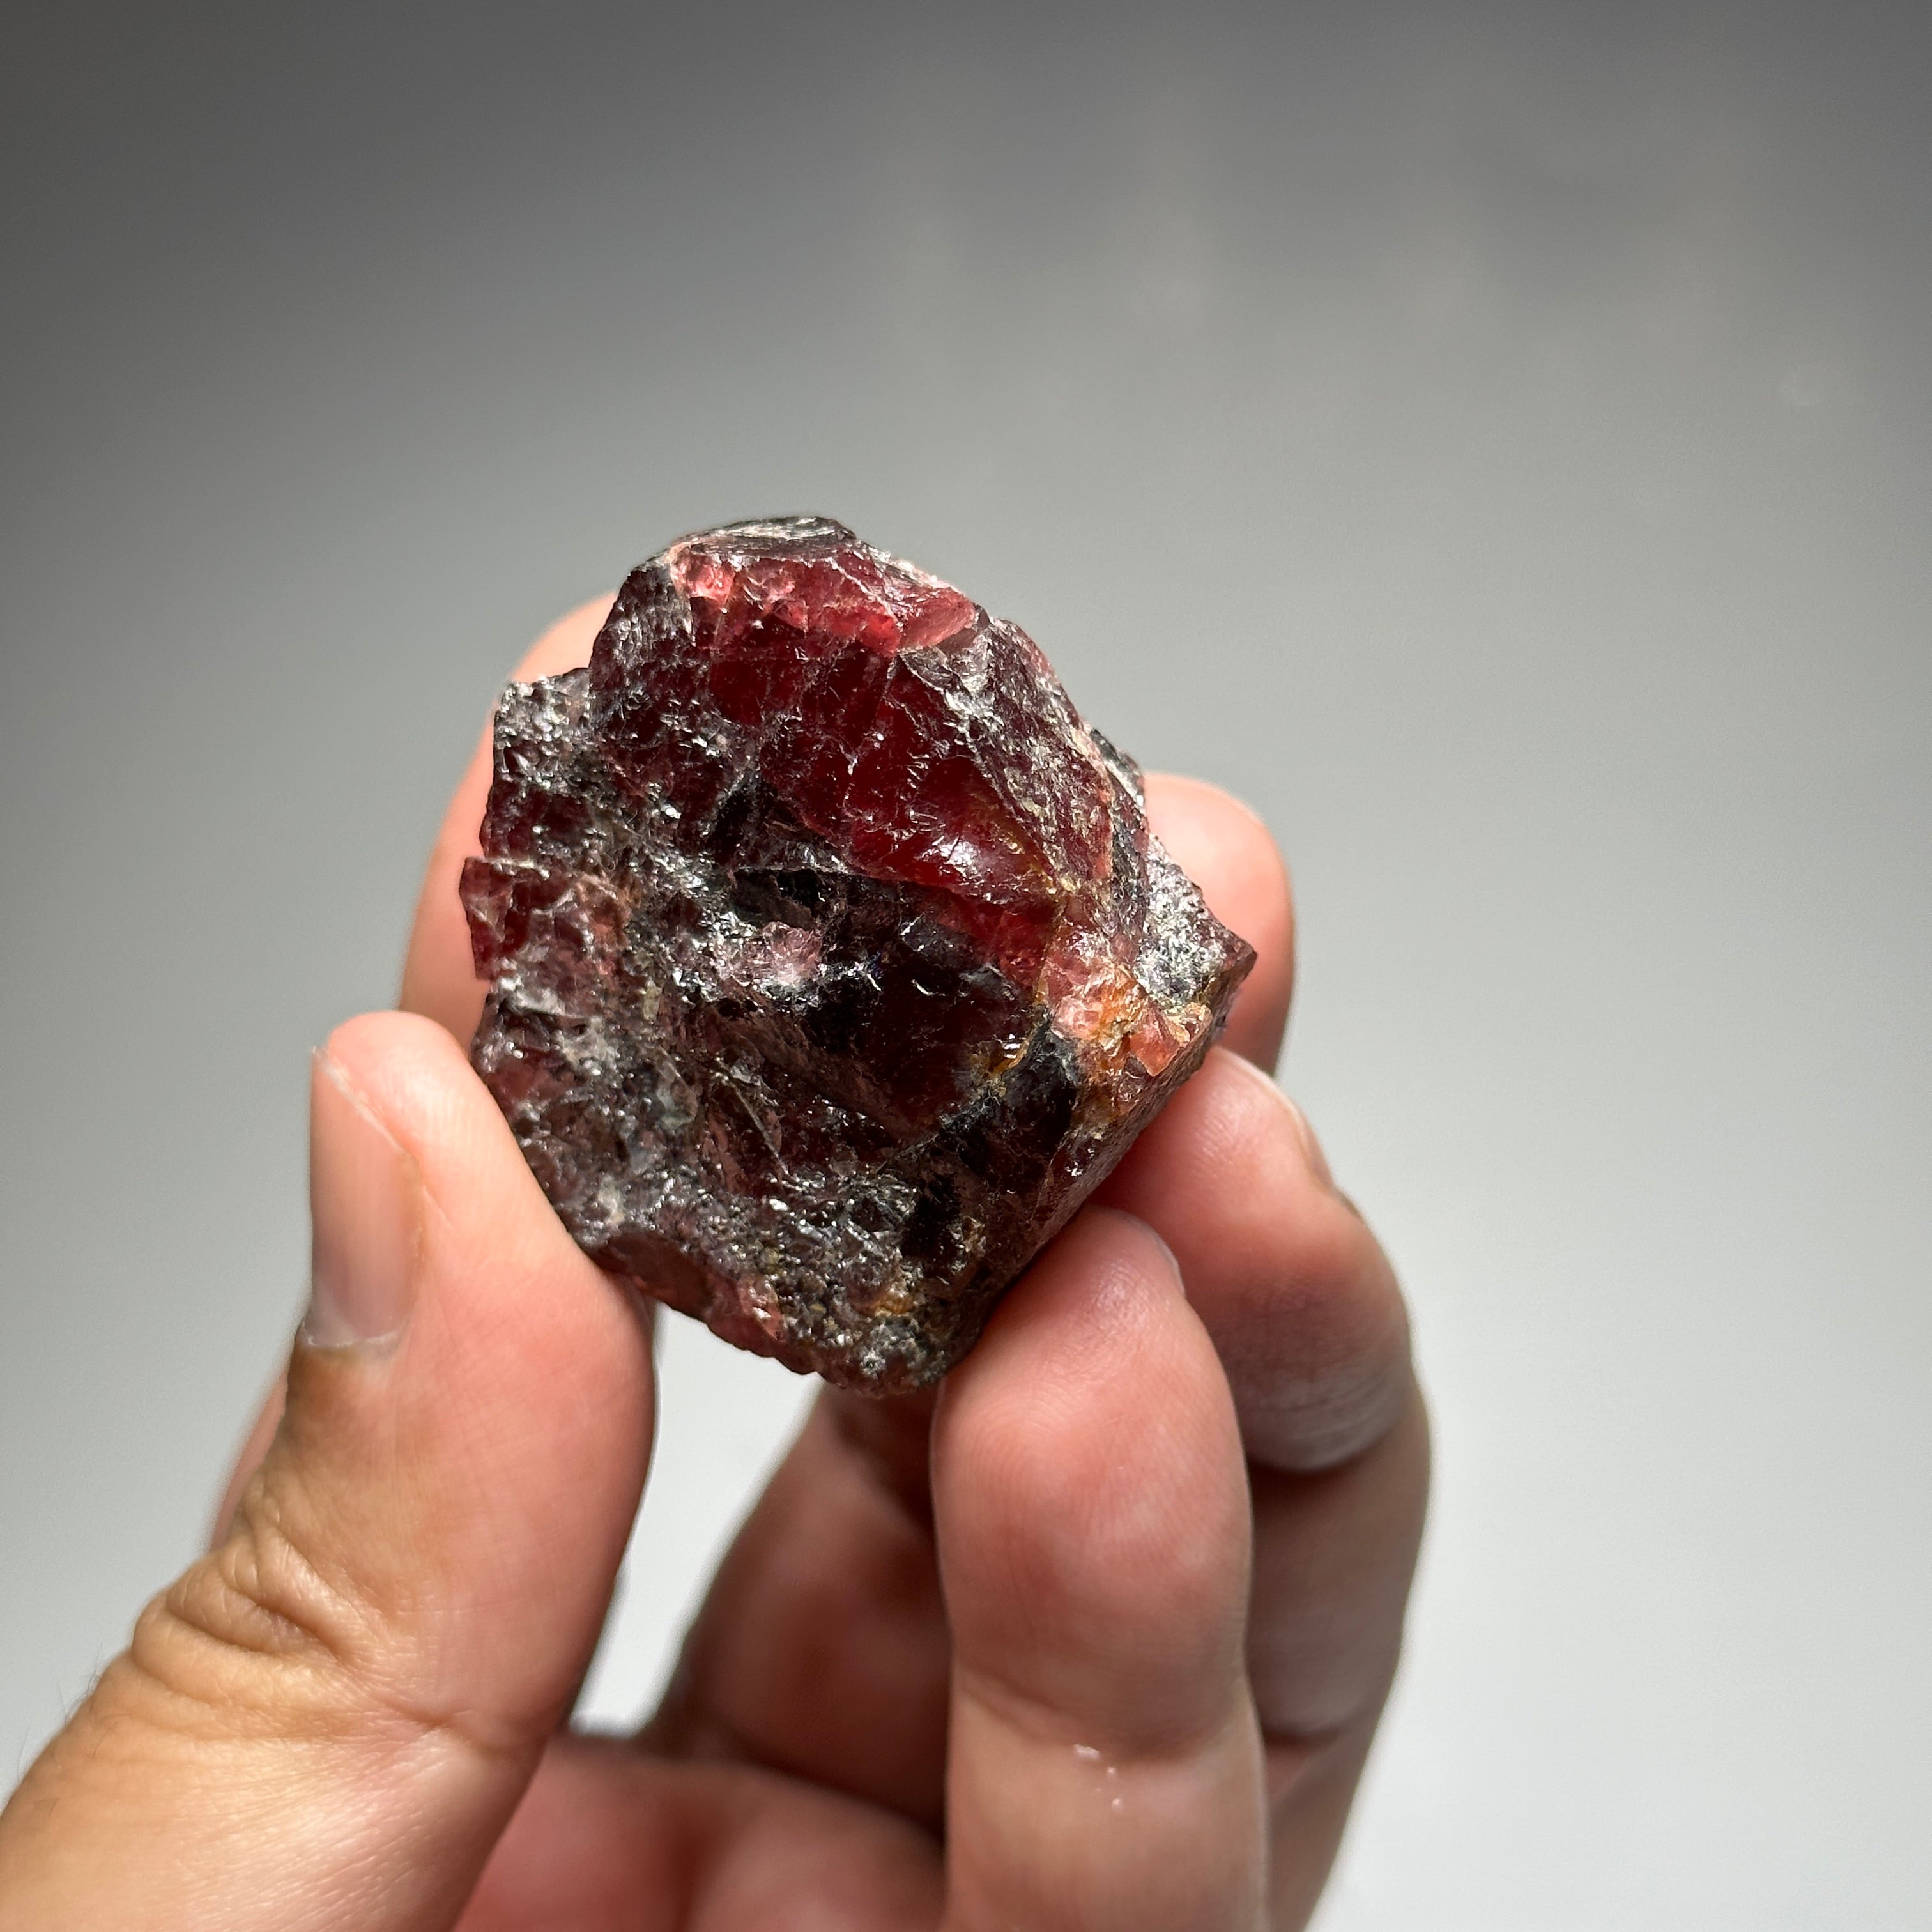 78.6gm / 393.00ct Mahenge Spinel With Facetable Portions, Tanzania, Untreated Unheated